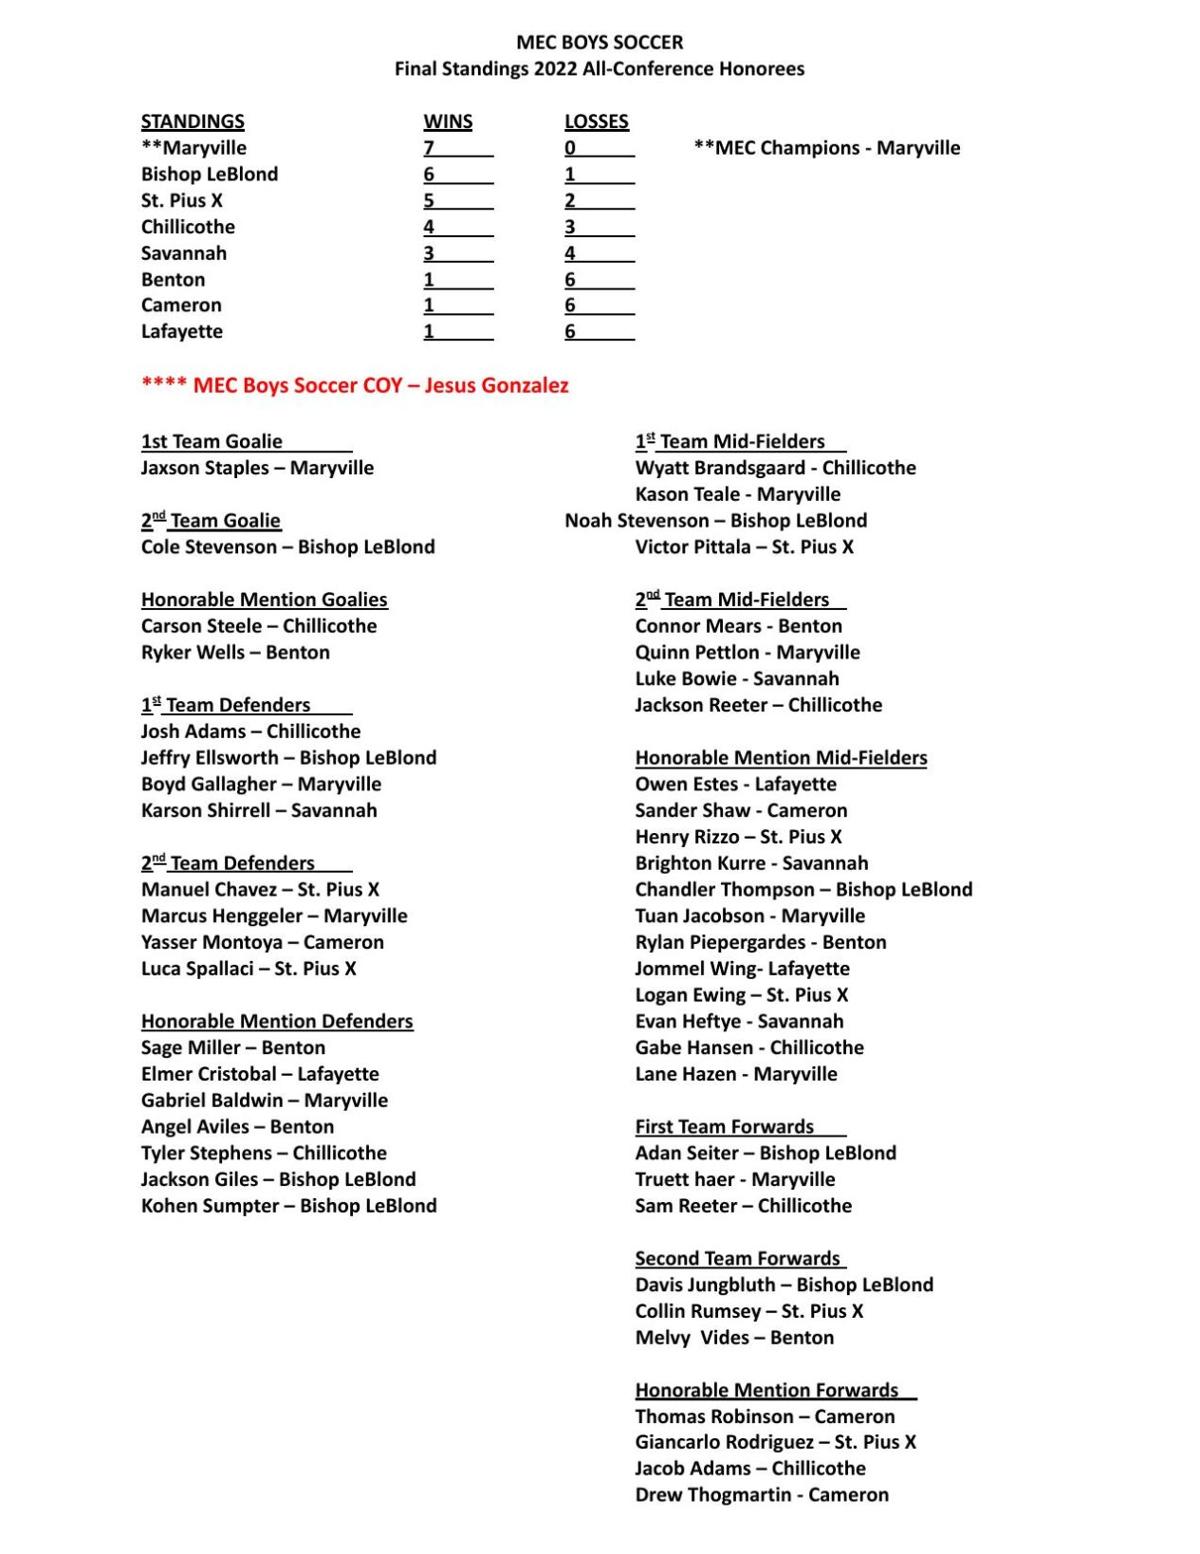 MEC Boys Soccer 2022 Final Standings All Conference Honorees.docx.pdf